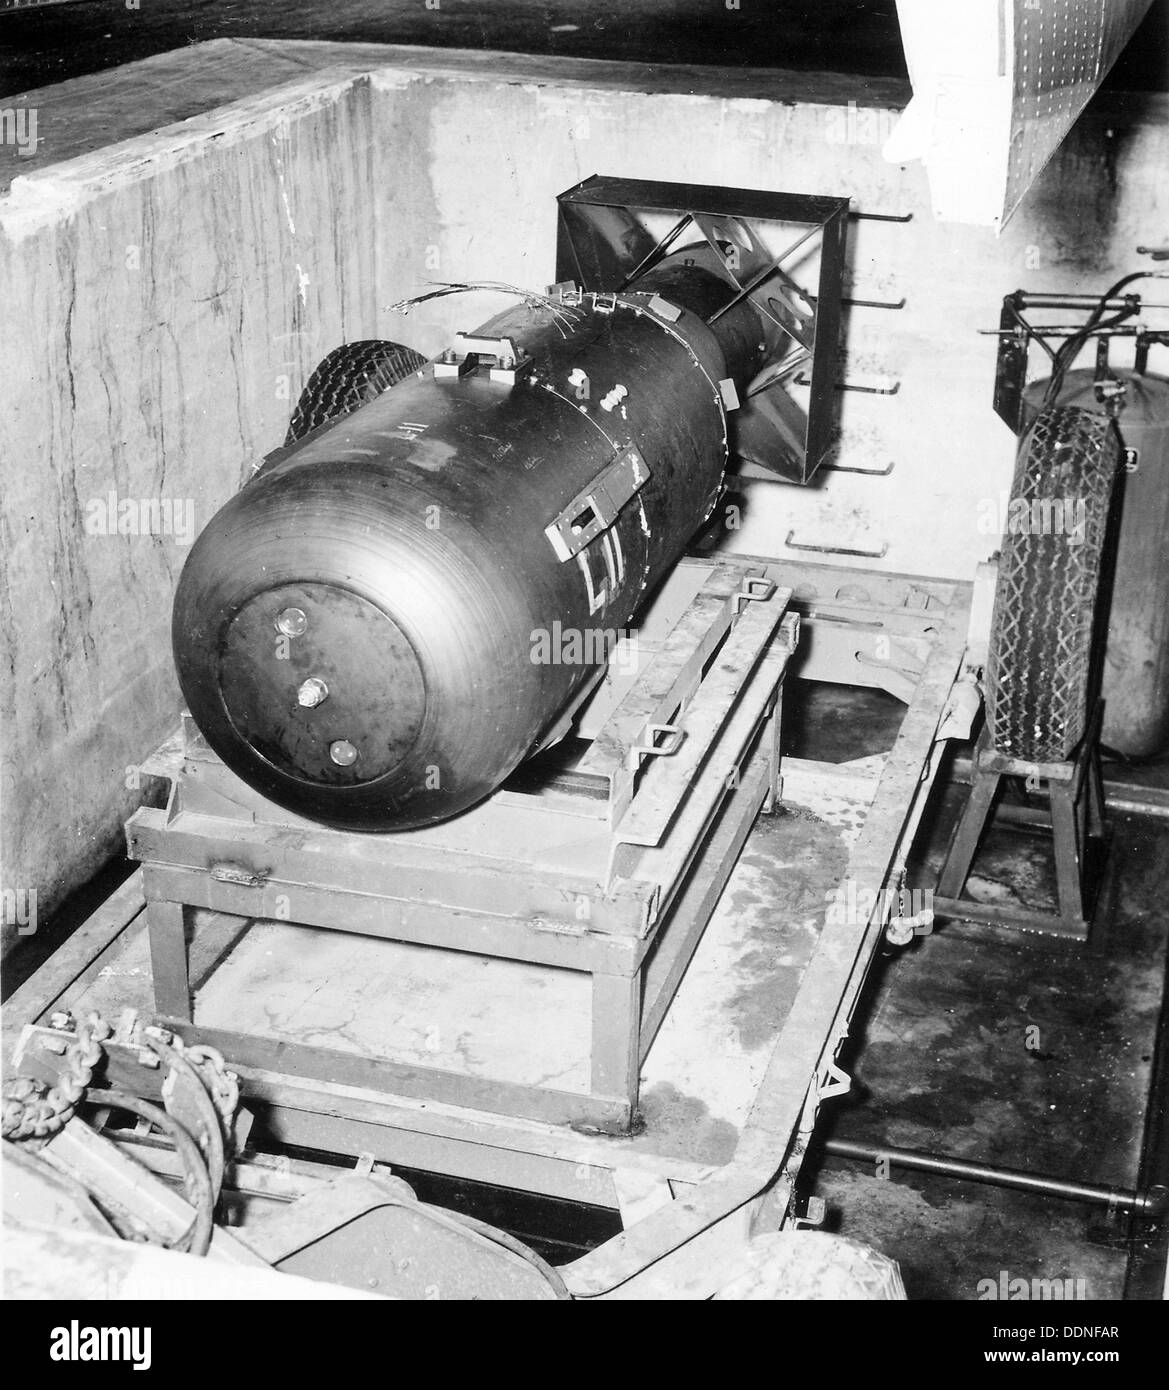 Little Boy atomic bomb that was dropped on Hiroshima on Tinian island, before being loaded into Enola Gay bomber Stock Photo